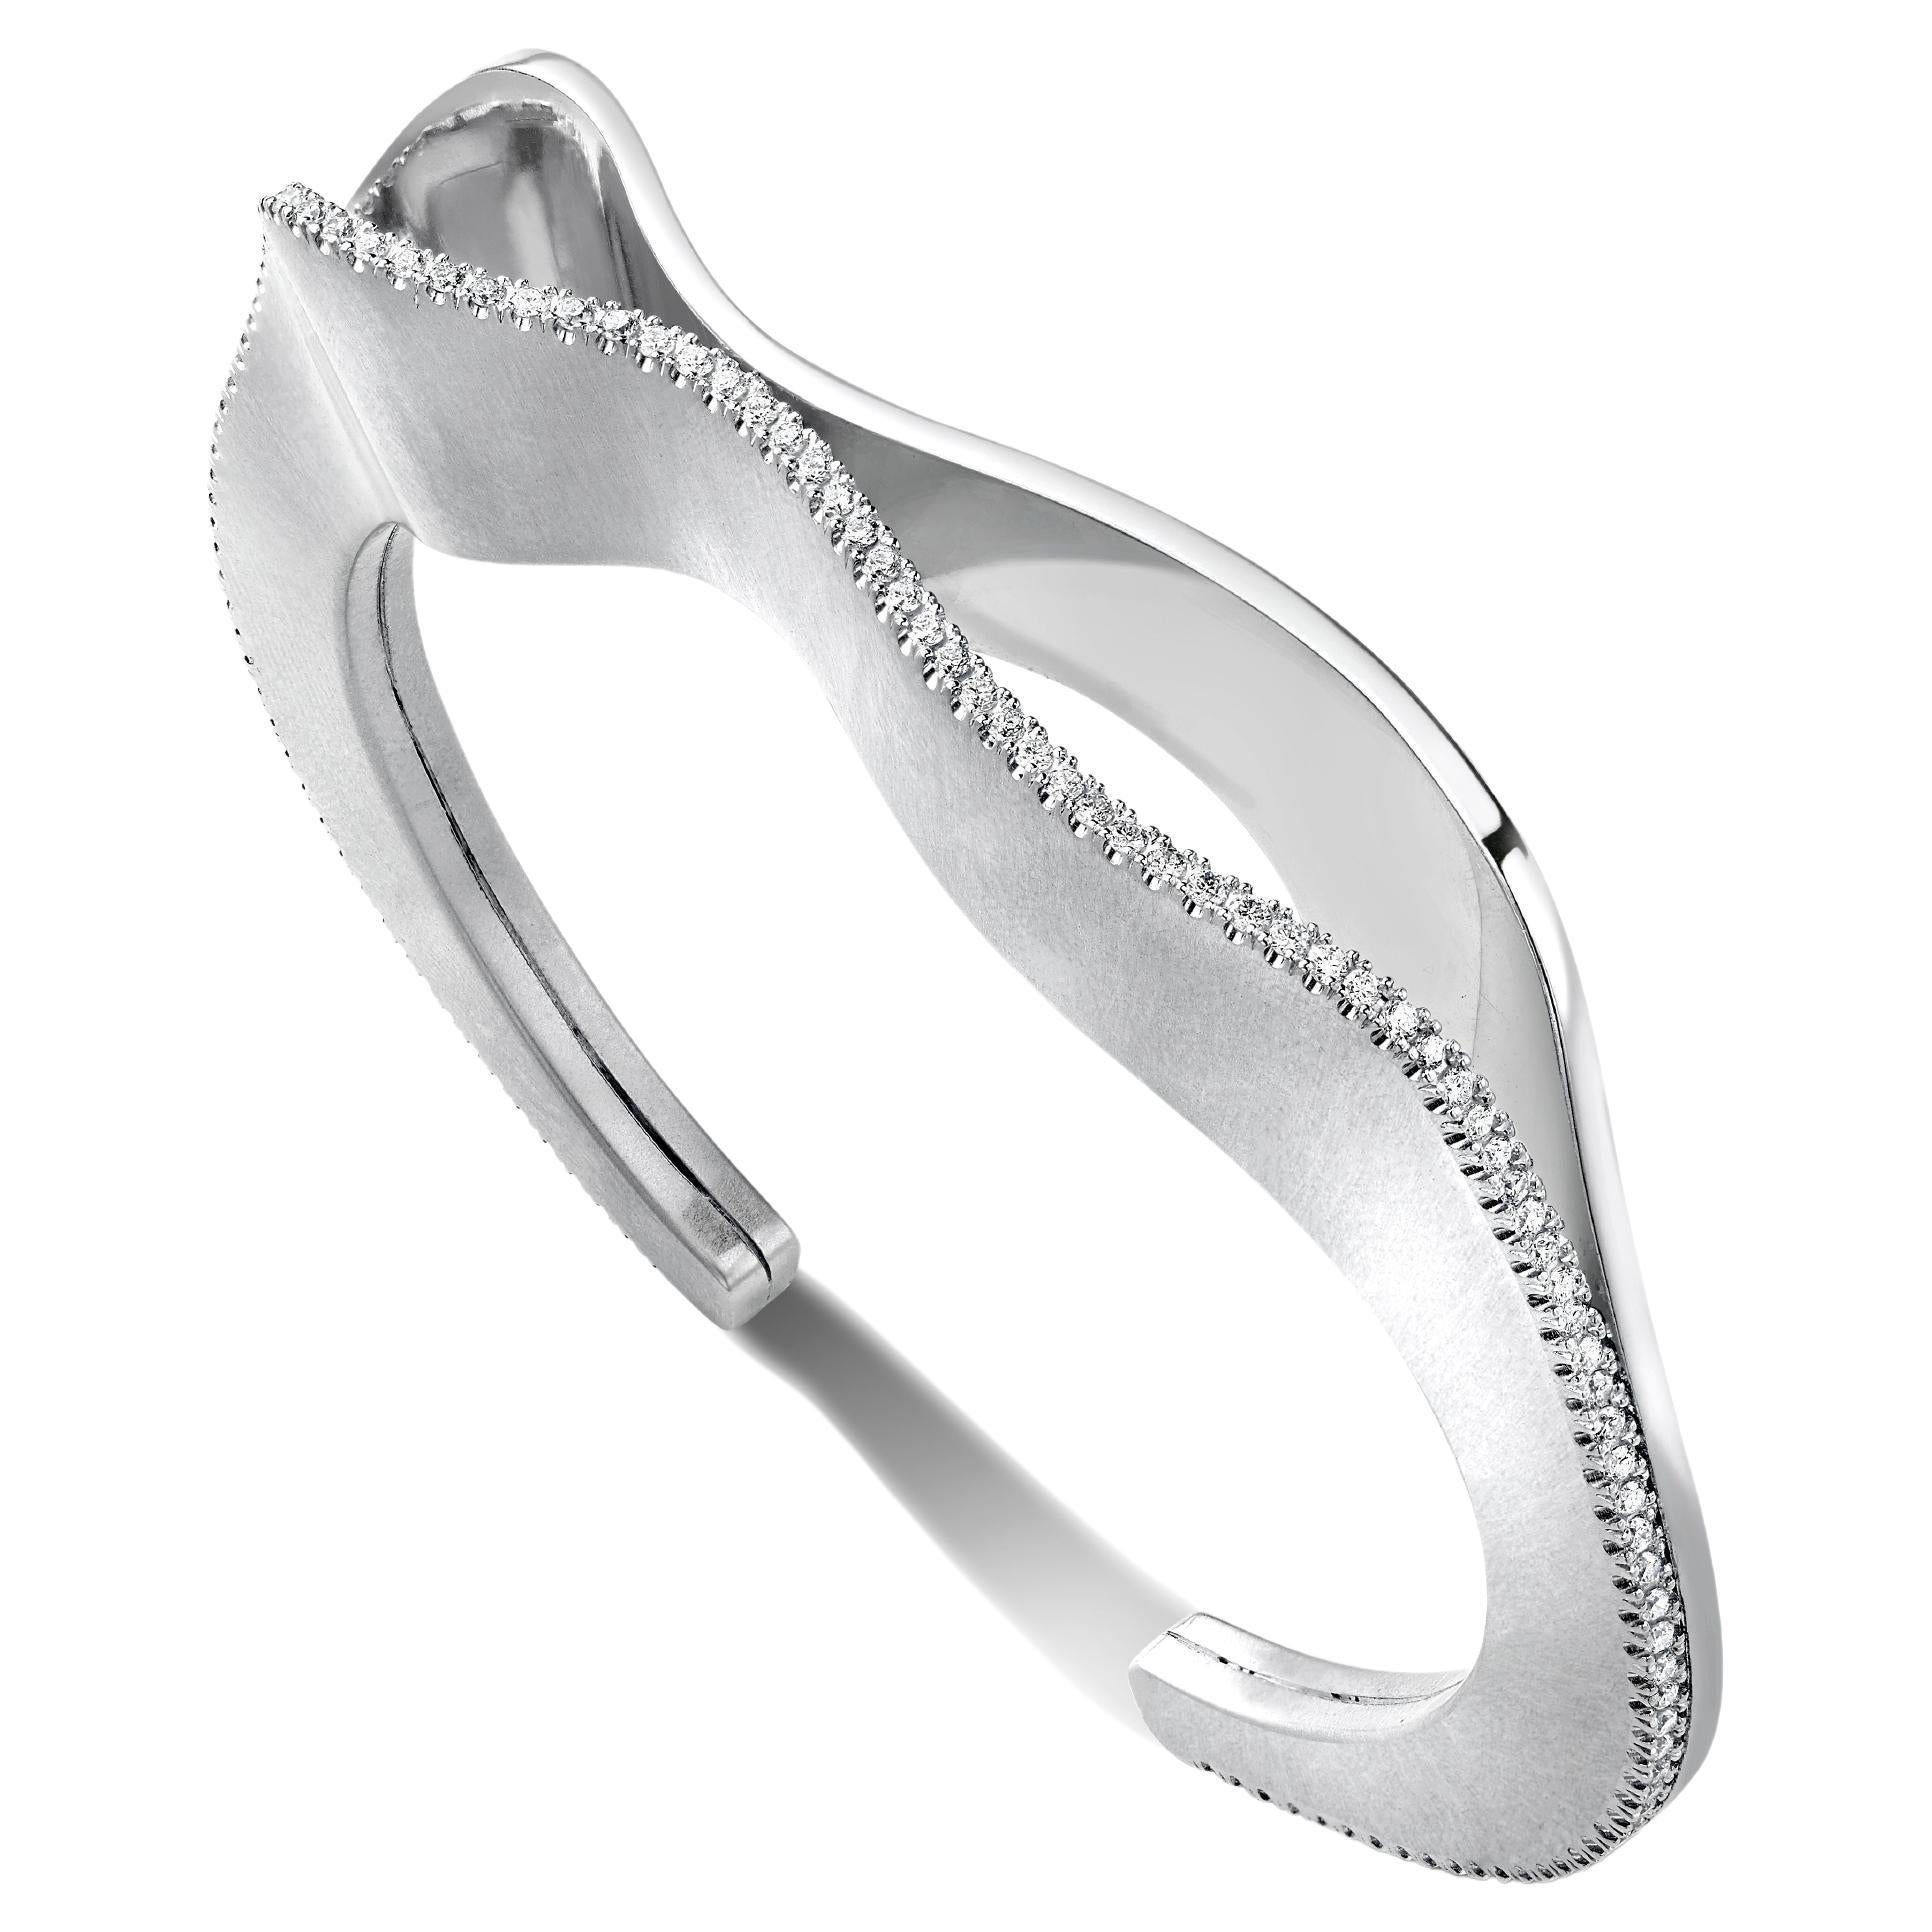 STRATUM BANGLE White gold with a single diamond edge by Liv Luttrell For Sale